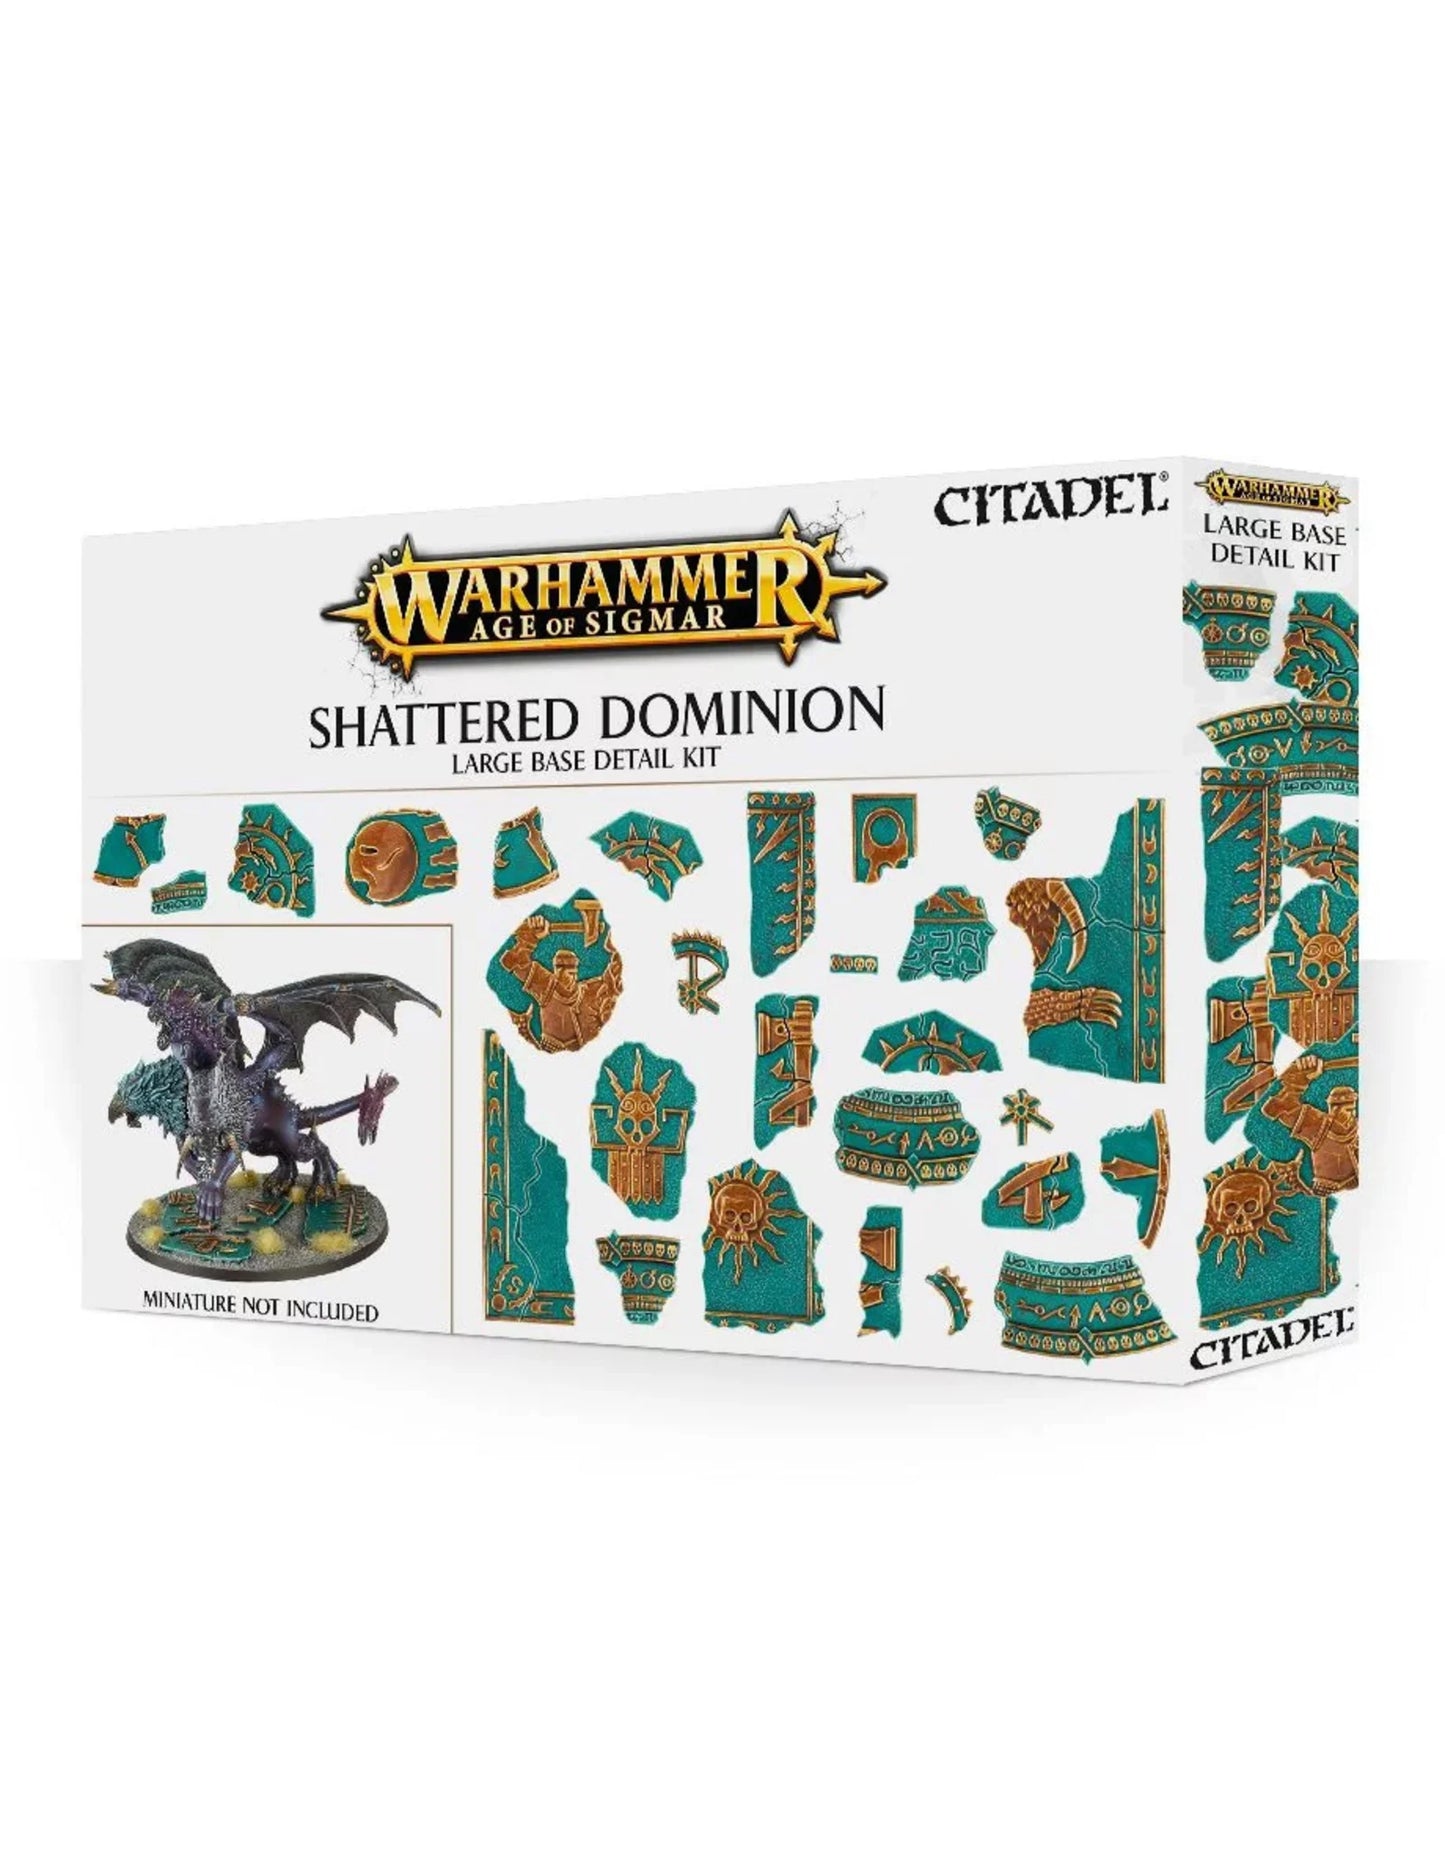 Age of Sigmar: Shattered Dominion - Large Base Detail